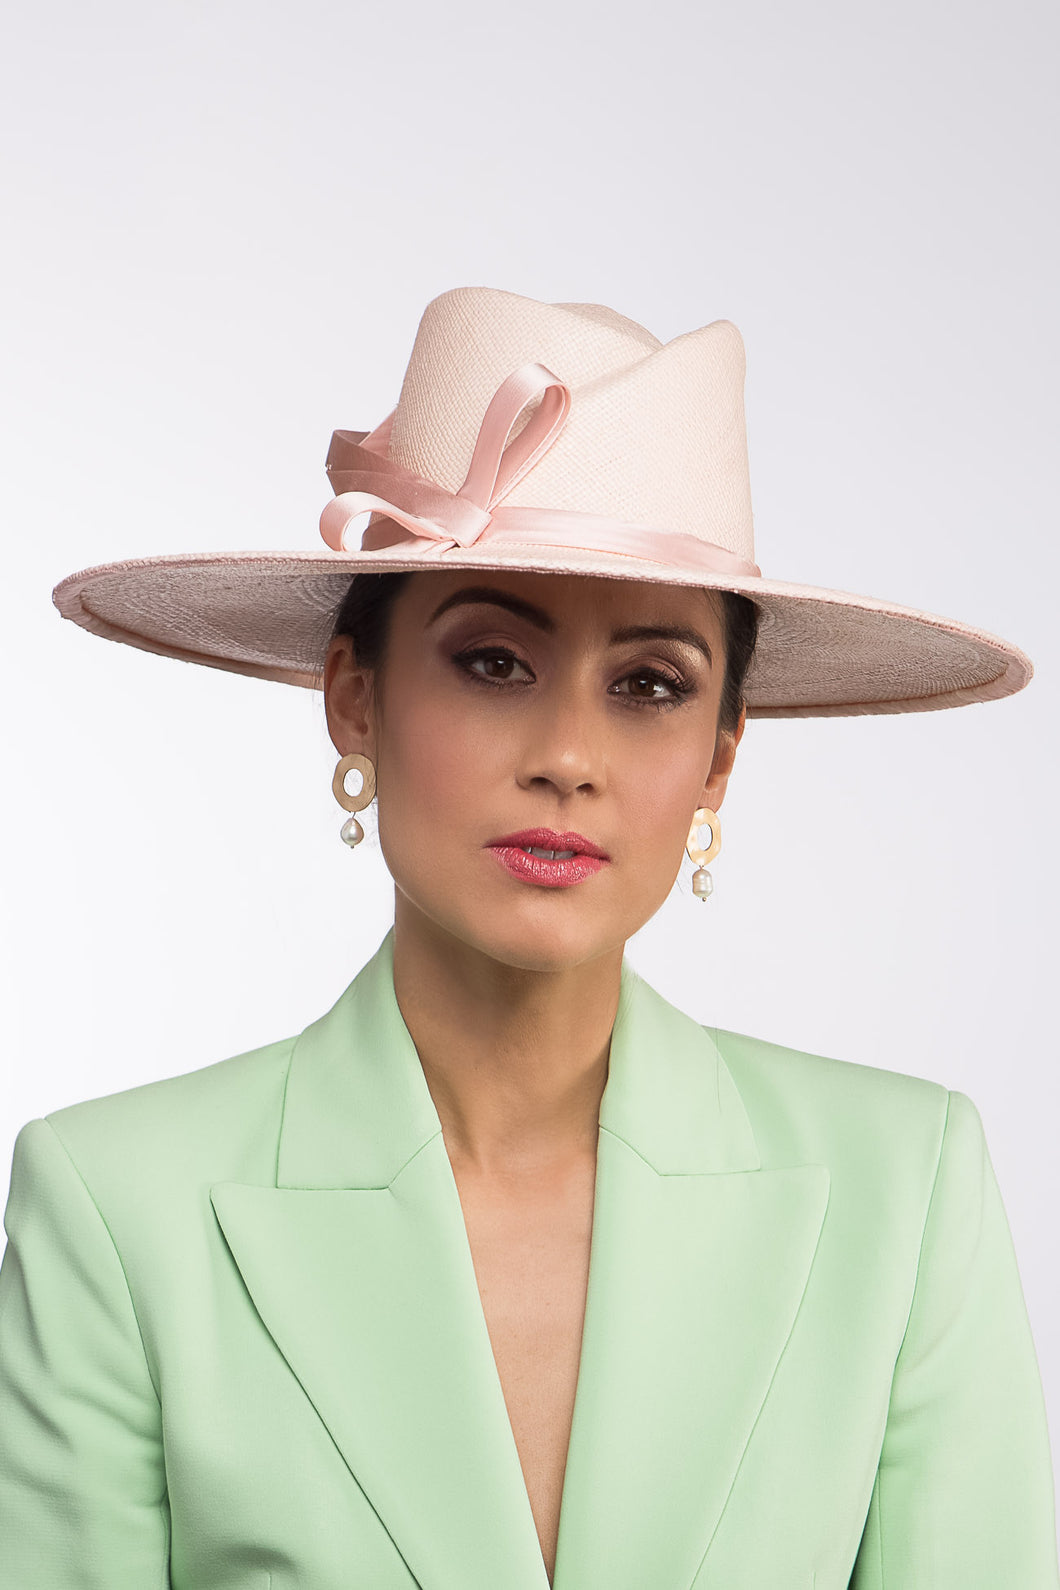 The Pink Panama Fedora with Silk Bow is a modern fedora with a sweeping angular crown and a wide flat brim in pastel pink straw